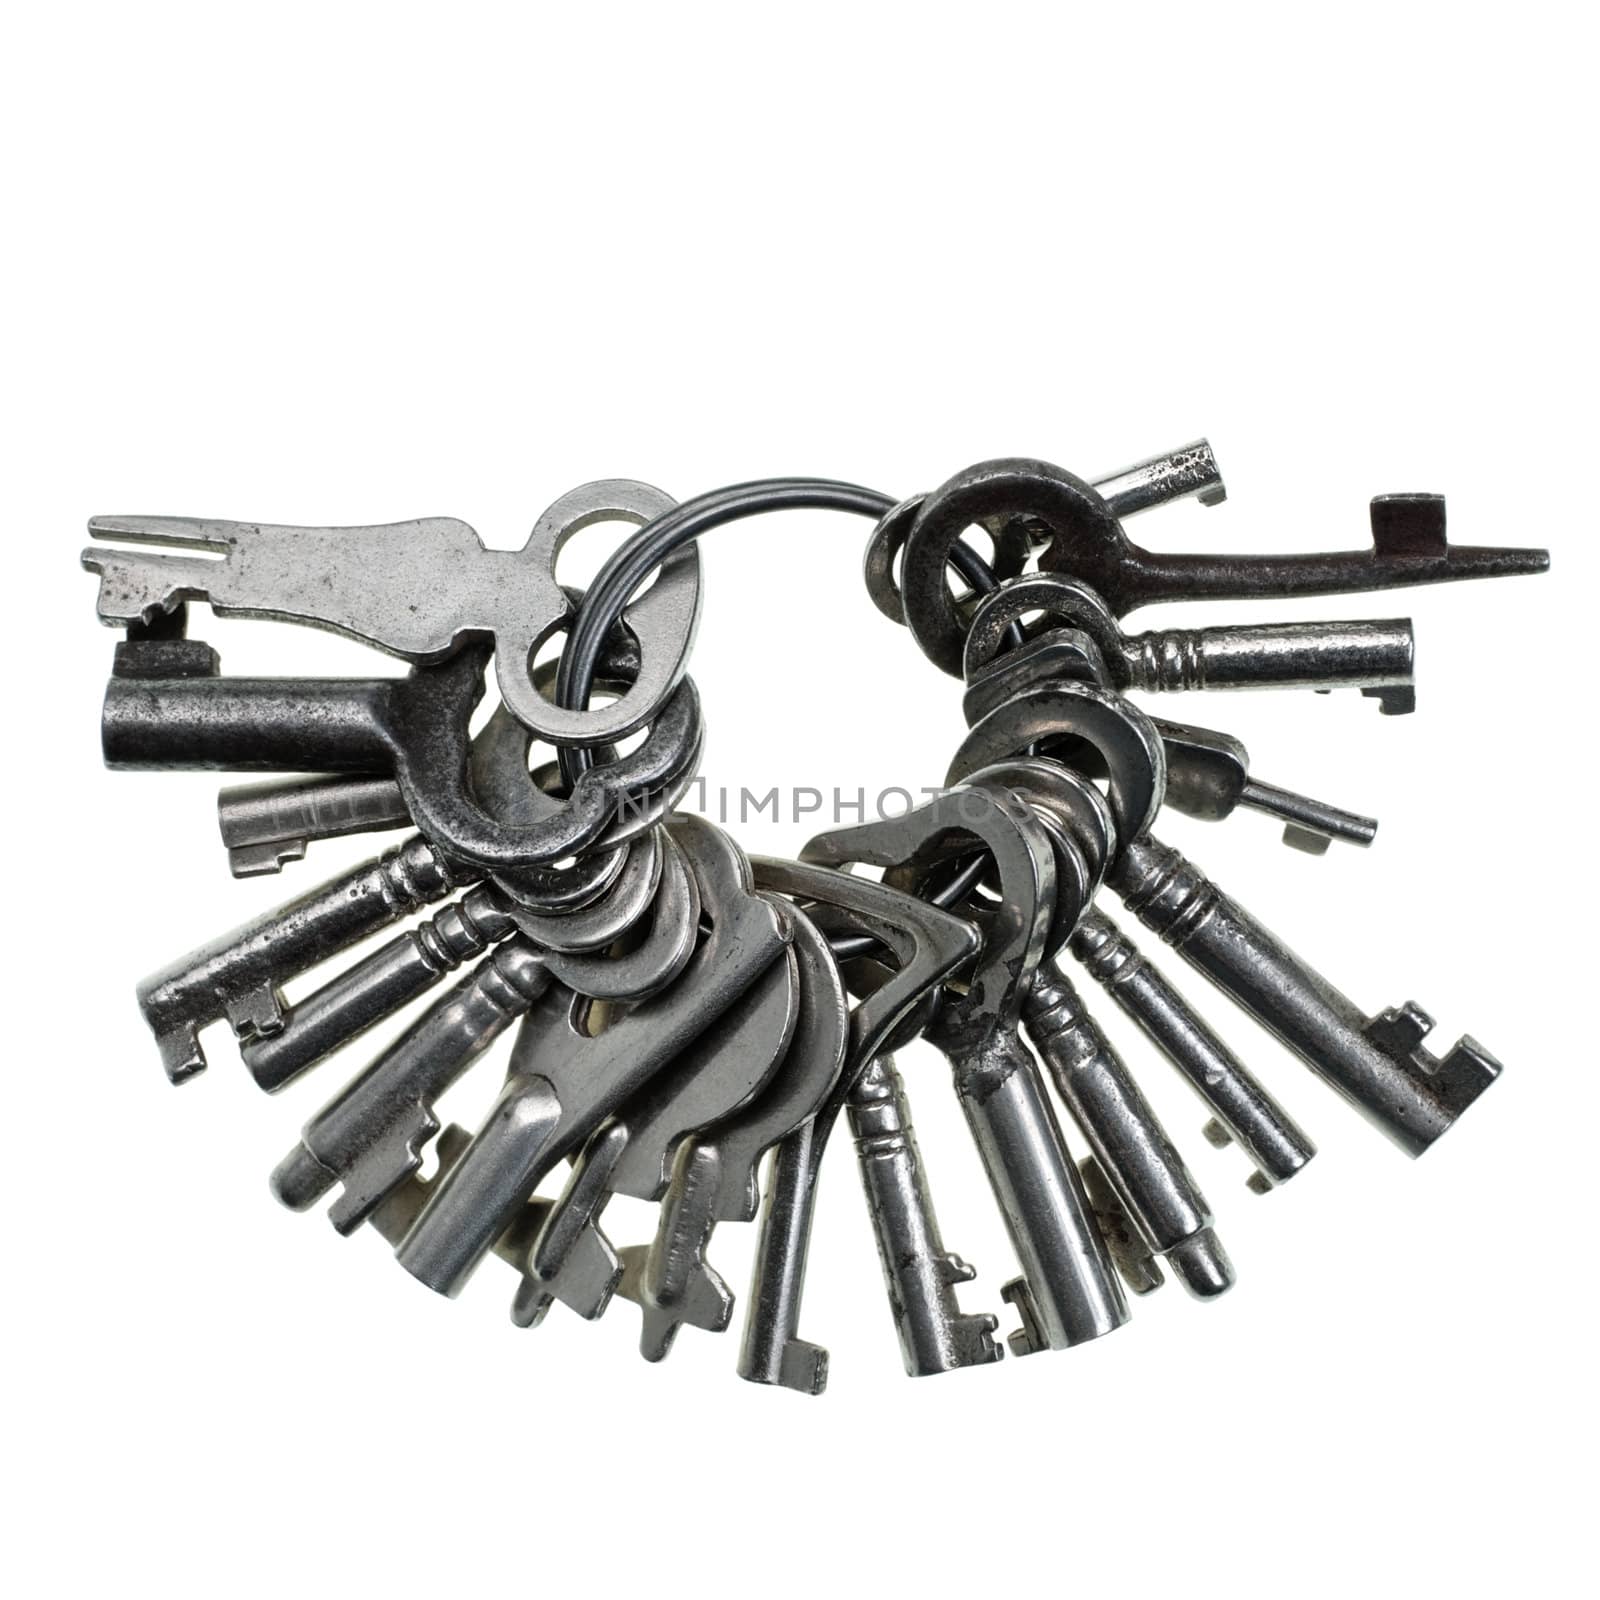 Bunch of small old keys on white background